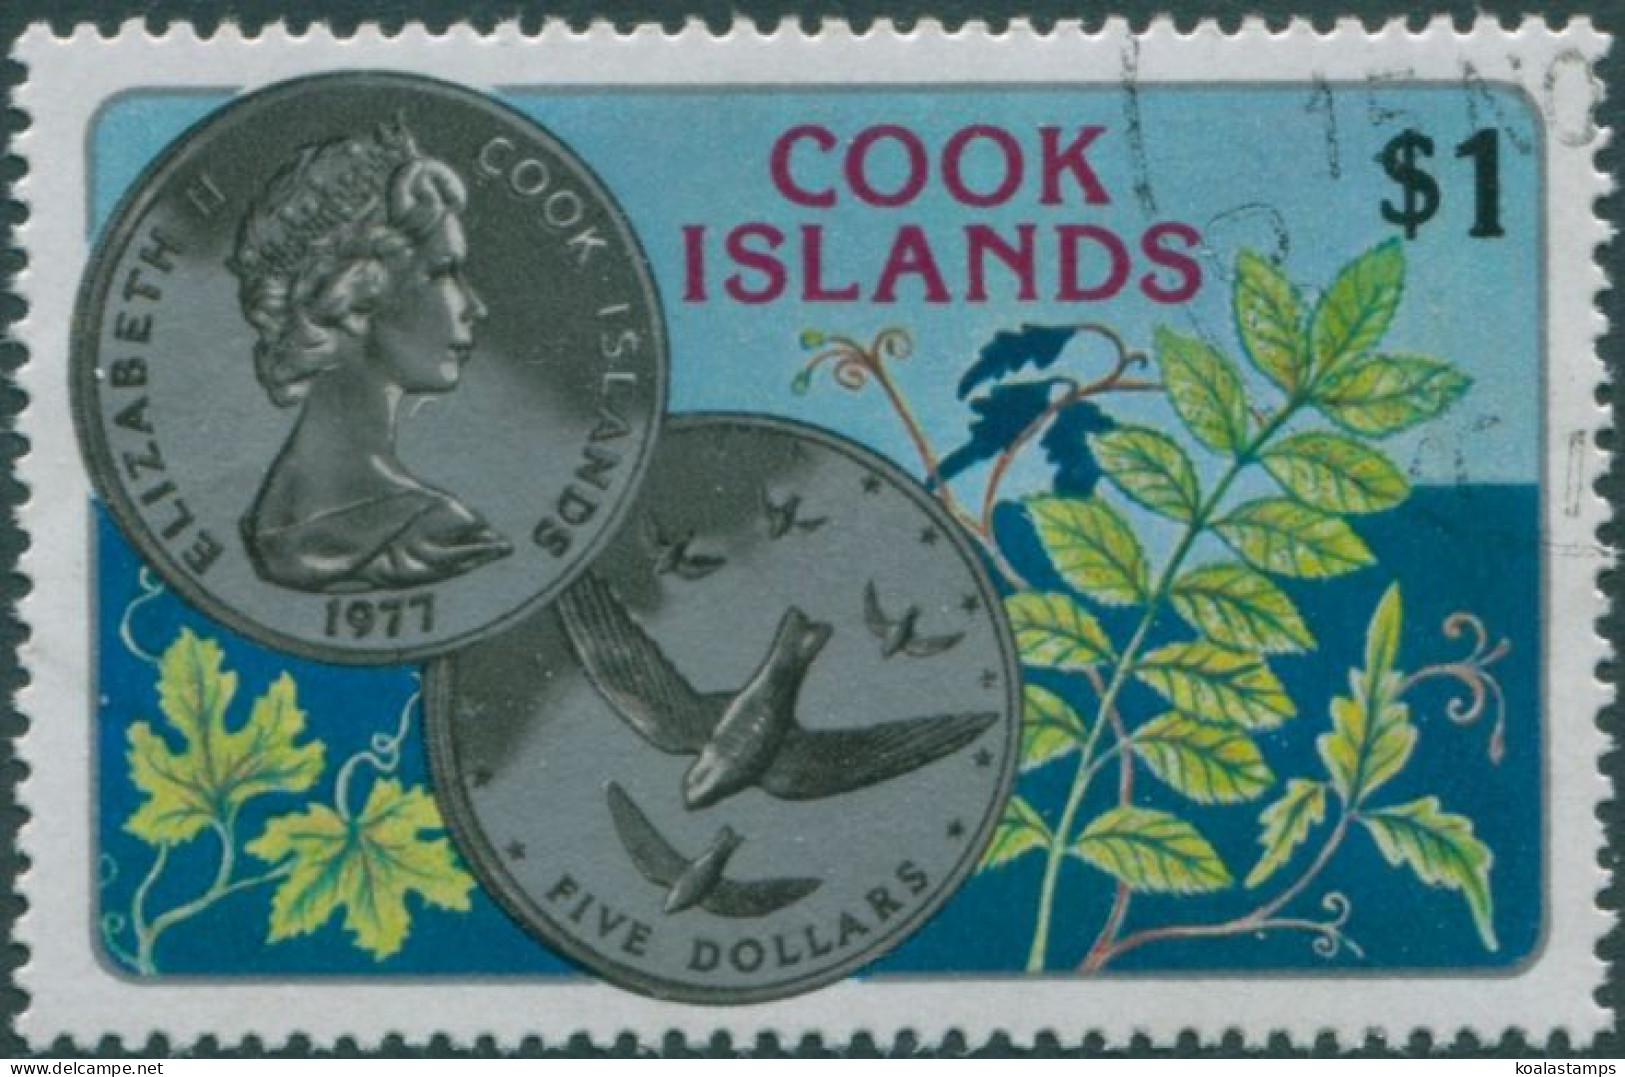 Cook Islands 1977 SG583 $1 National Wildlife Coin FU - Cook